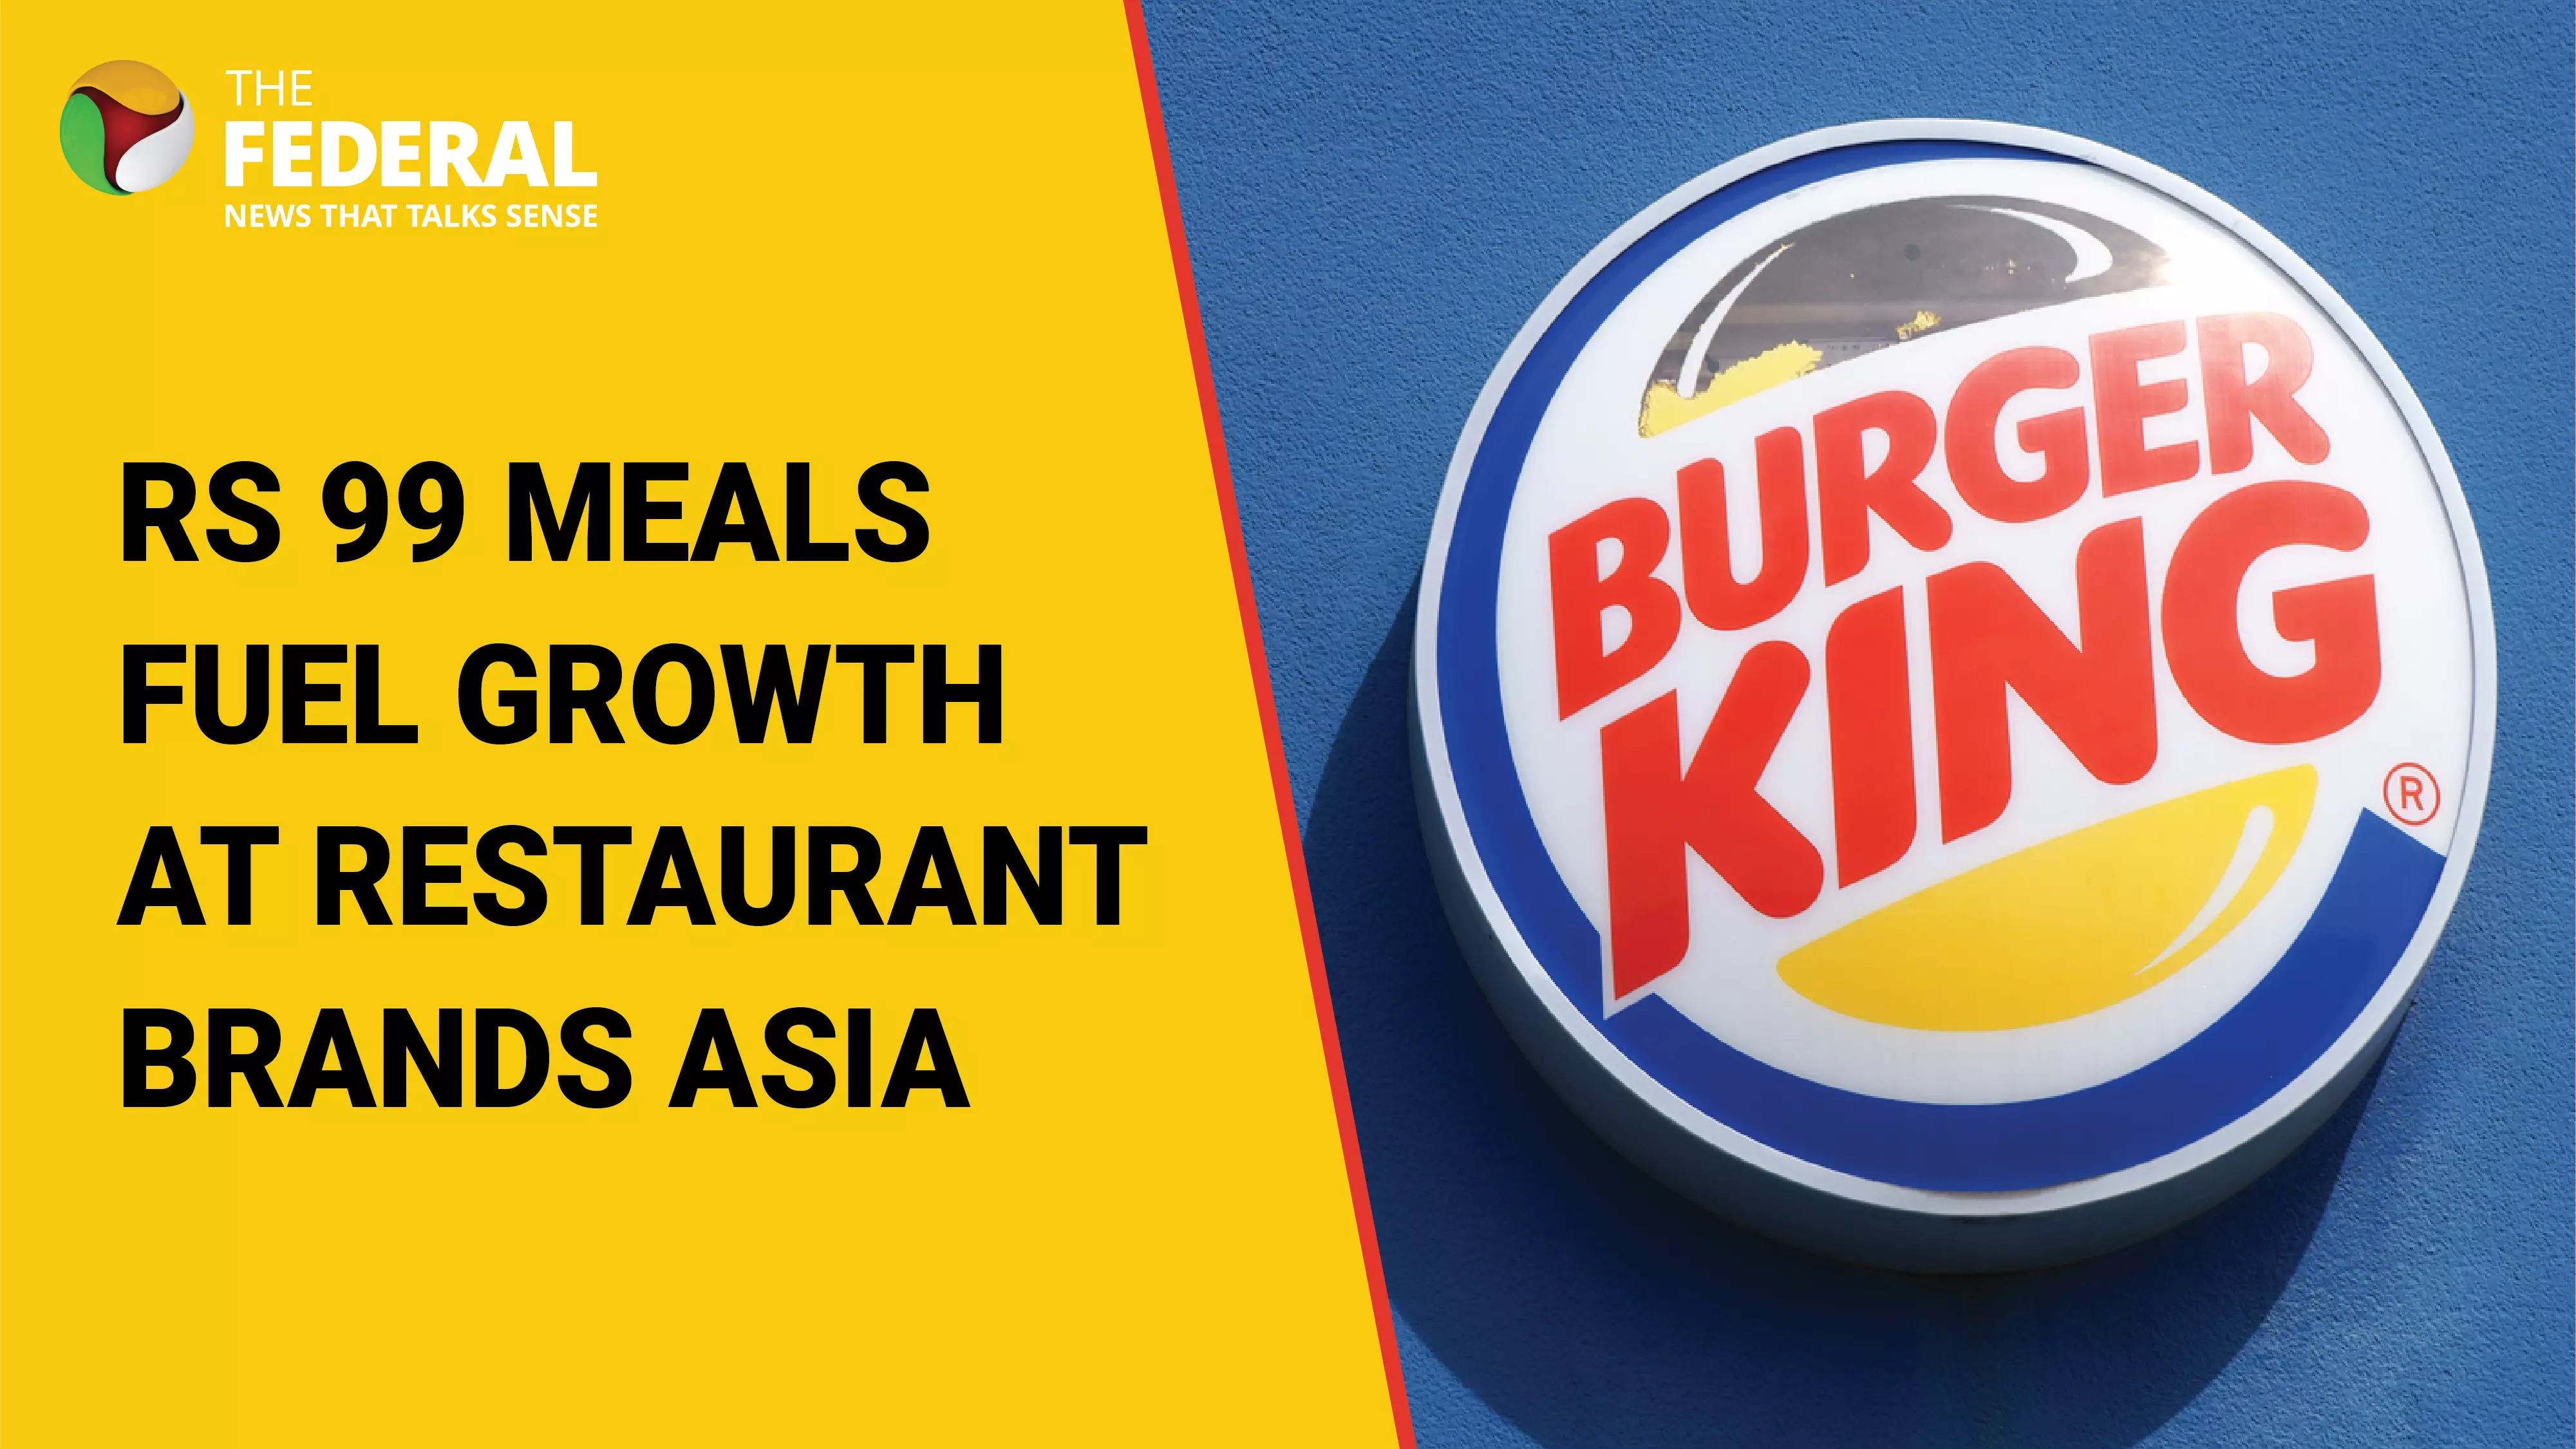 Rs 99 meals fuel growth at Restaurant Brands Asia